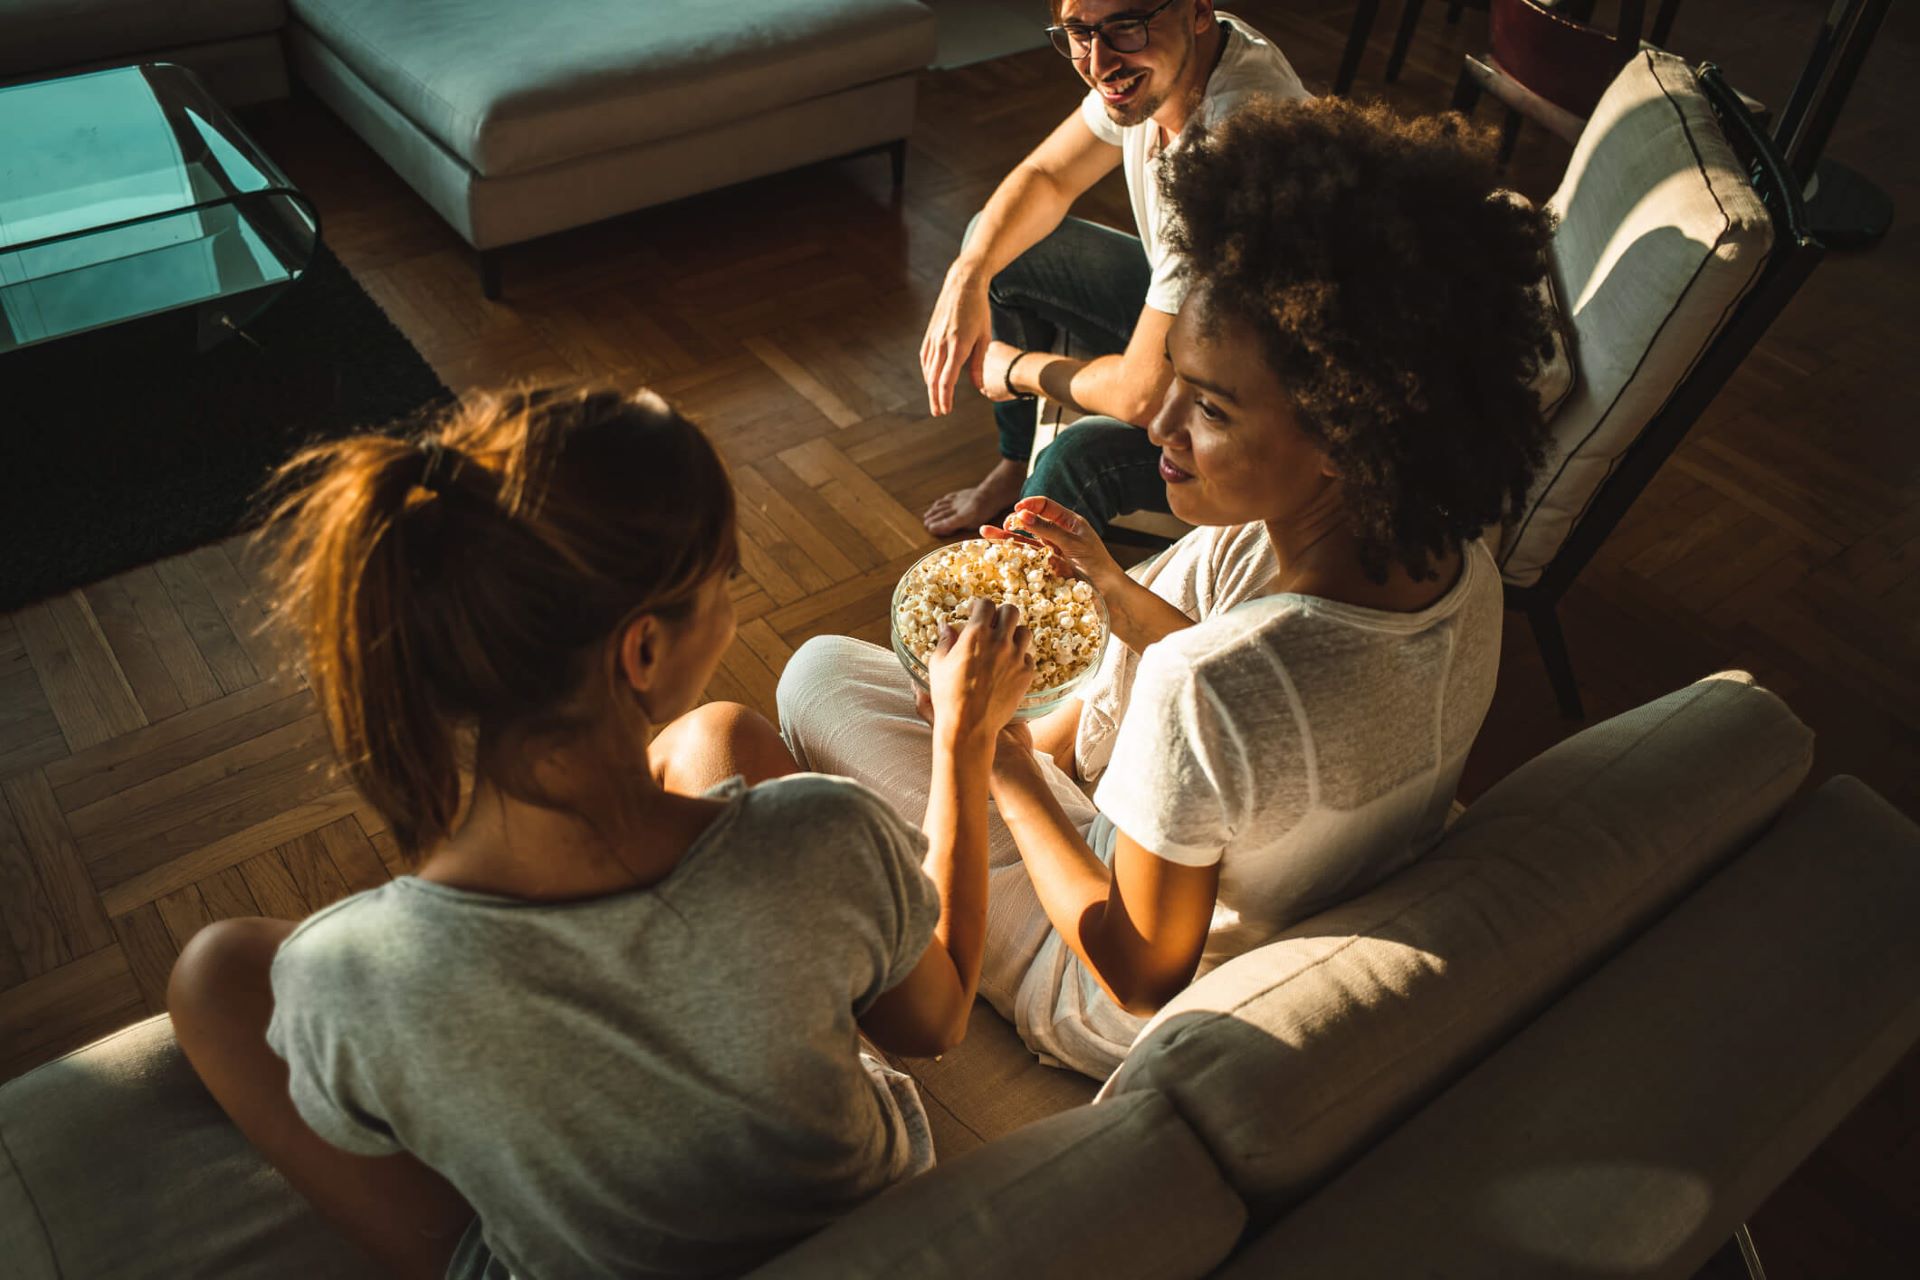 An image showing three friends watching TV in the living room while eating popcorn.